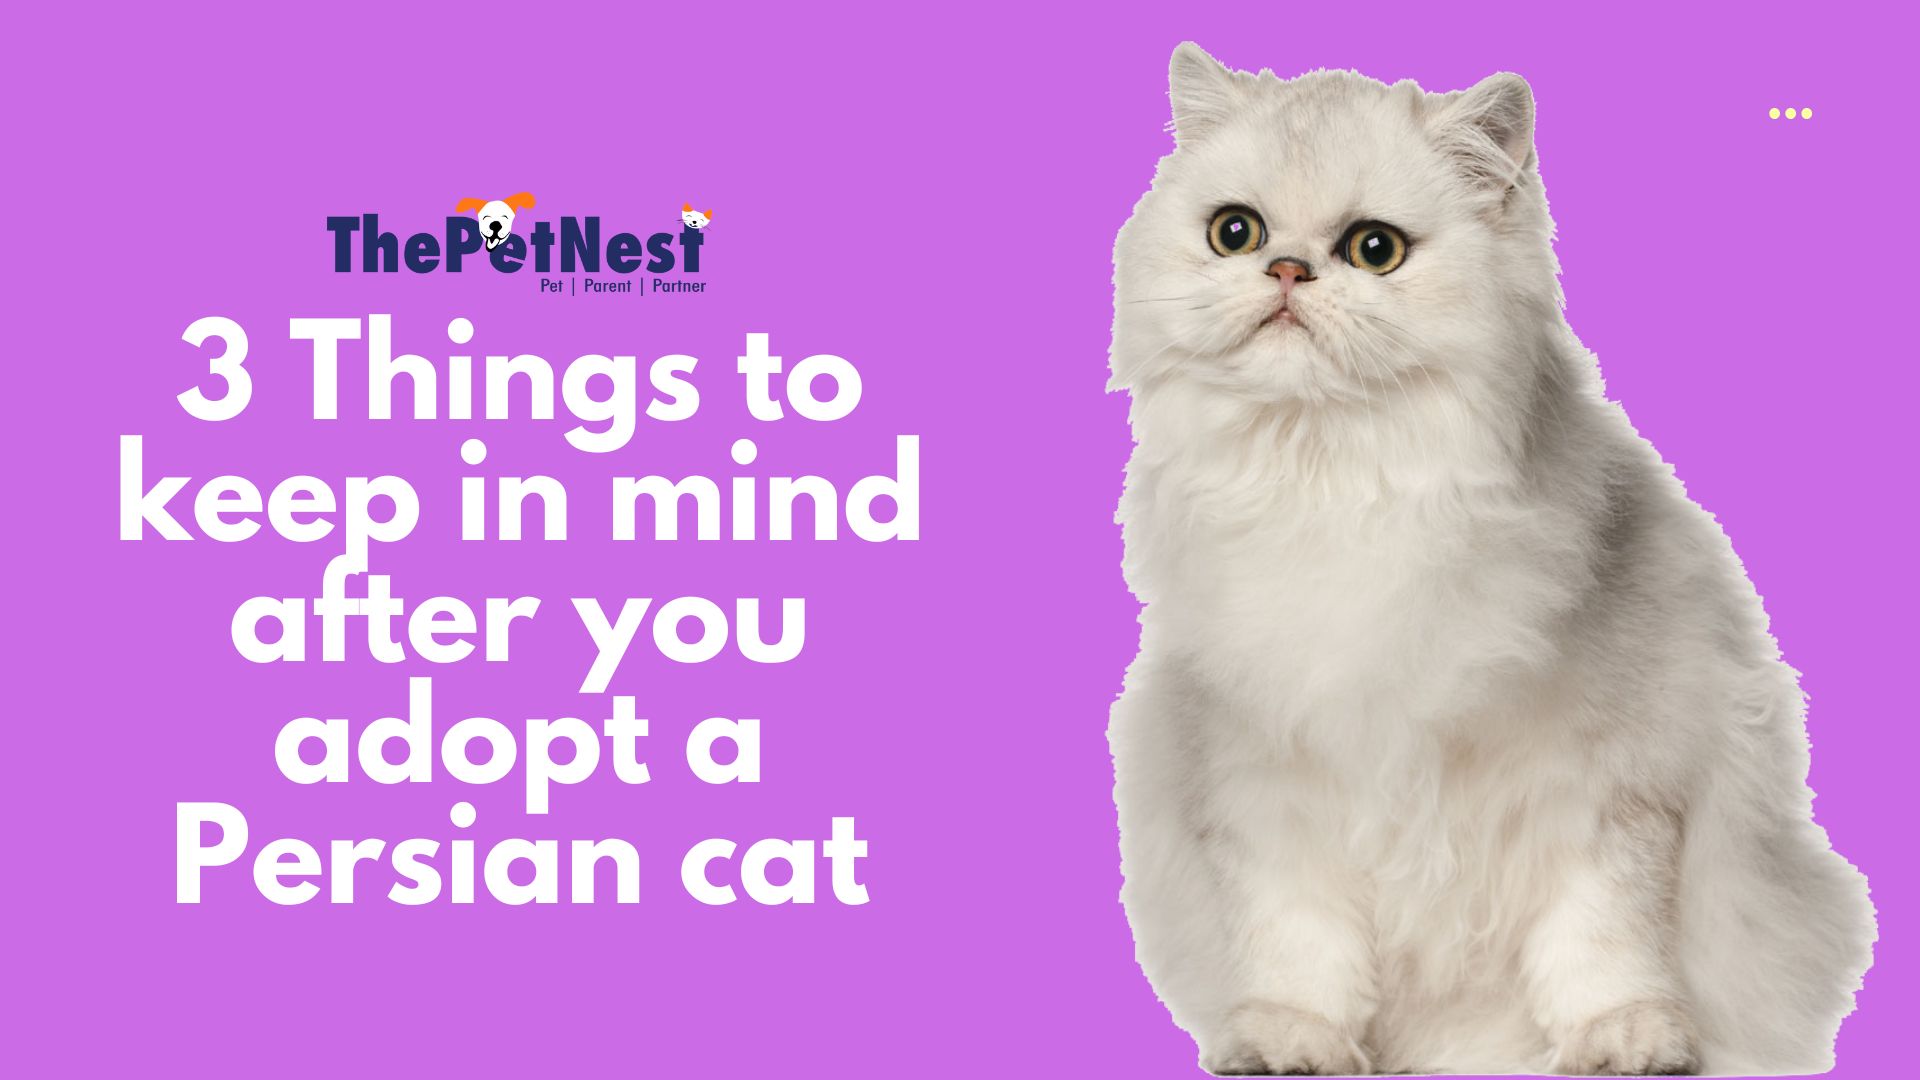 3 Things to keep in mind after you adopt a Persian cat